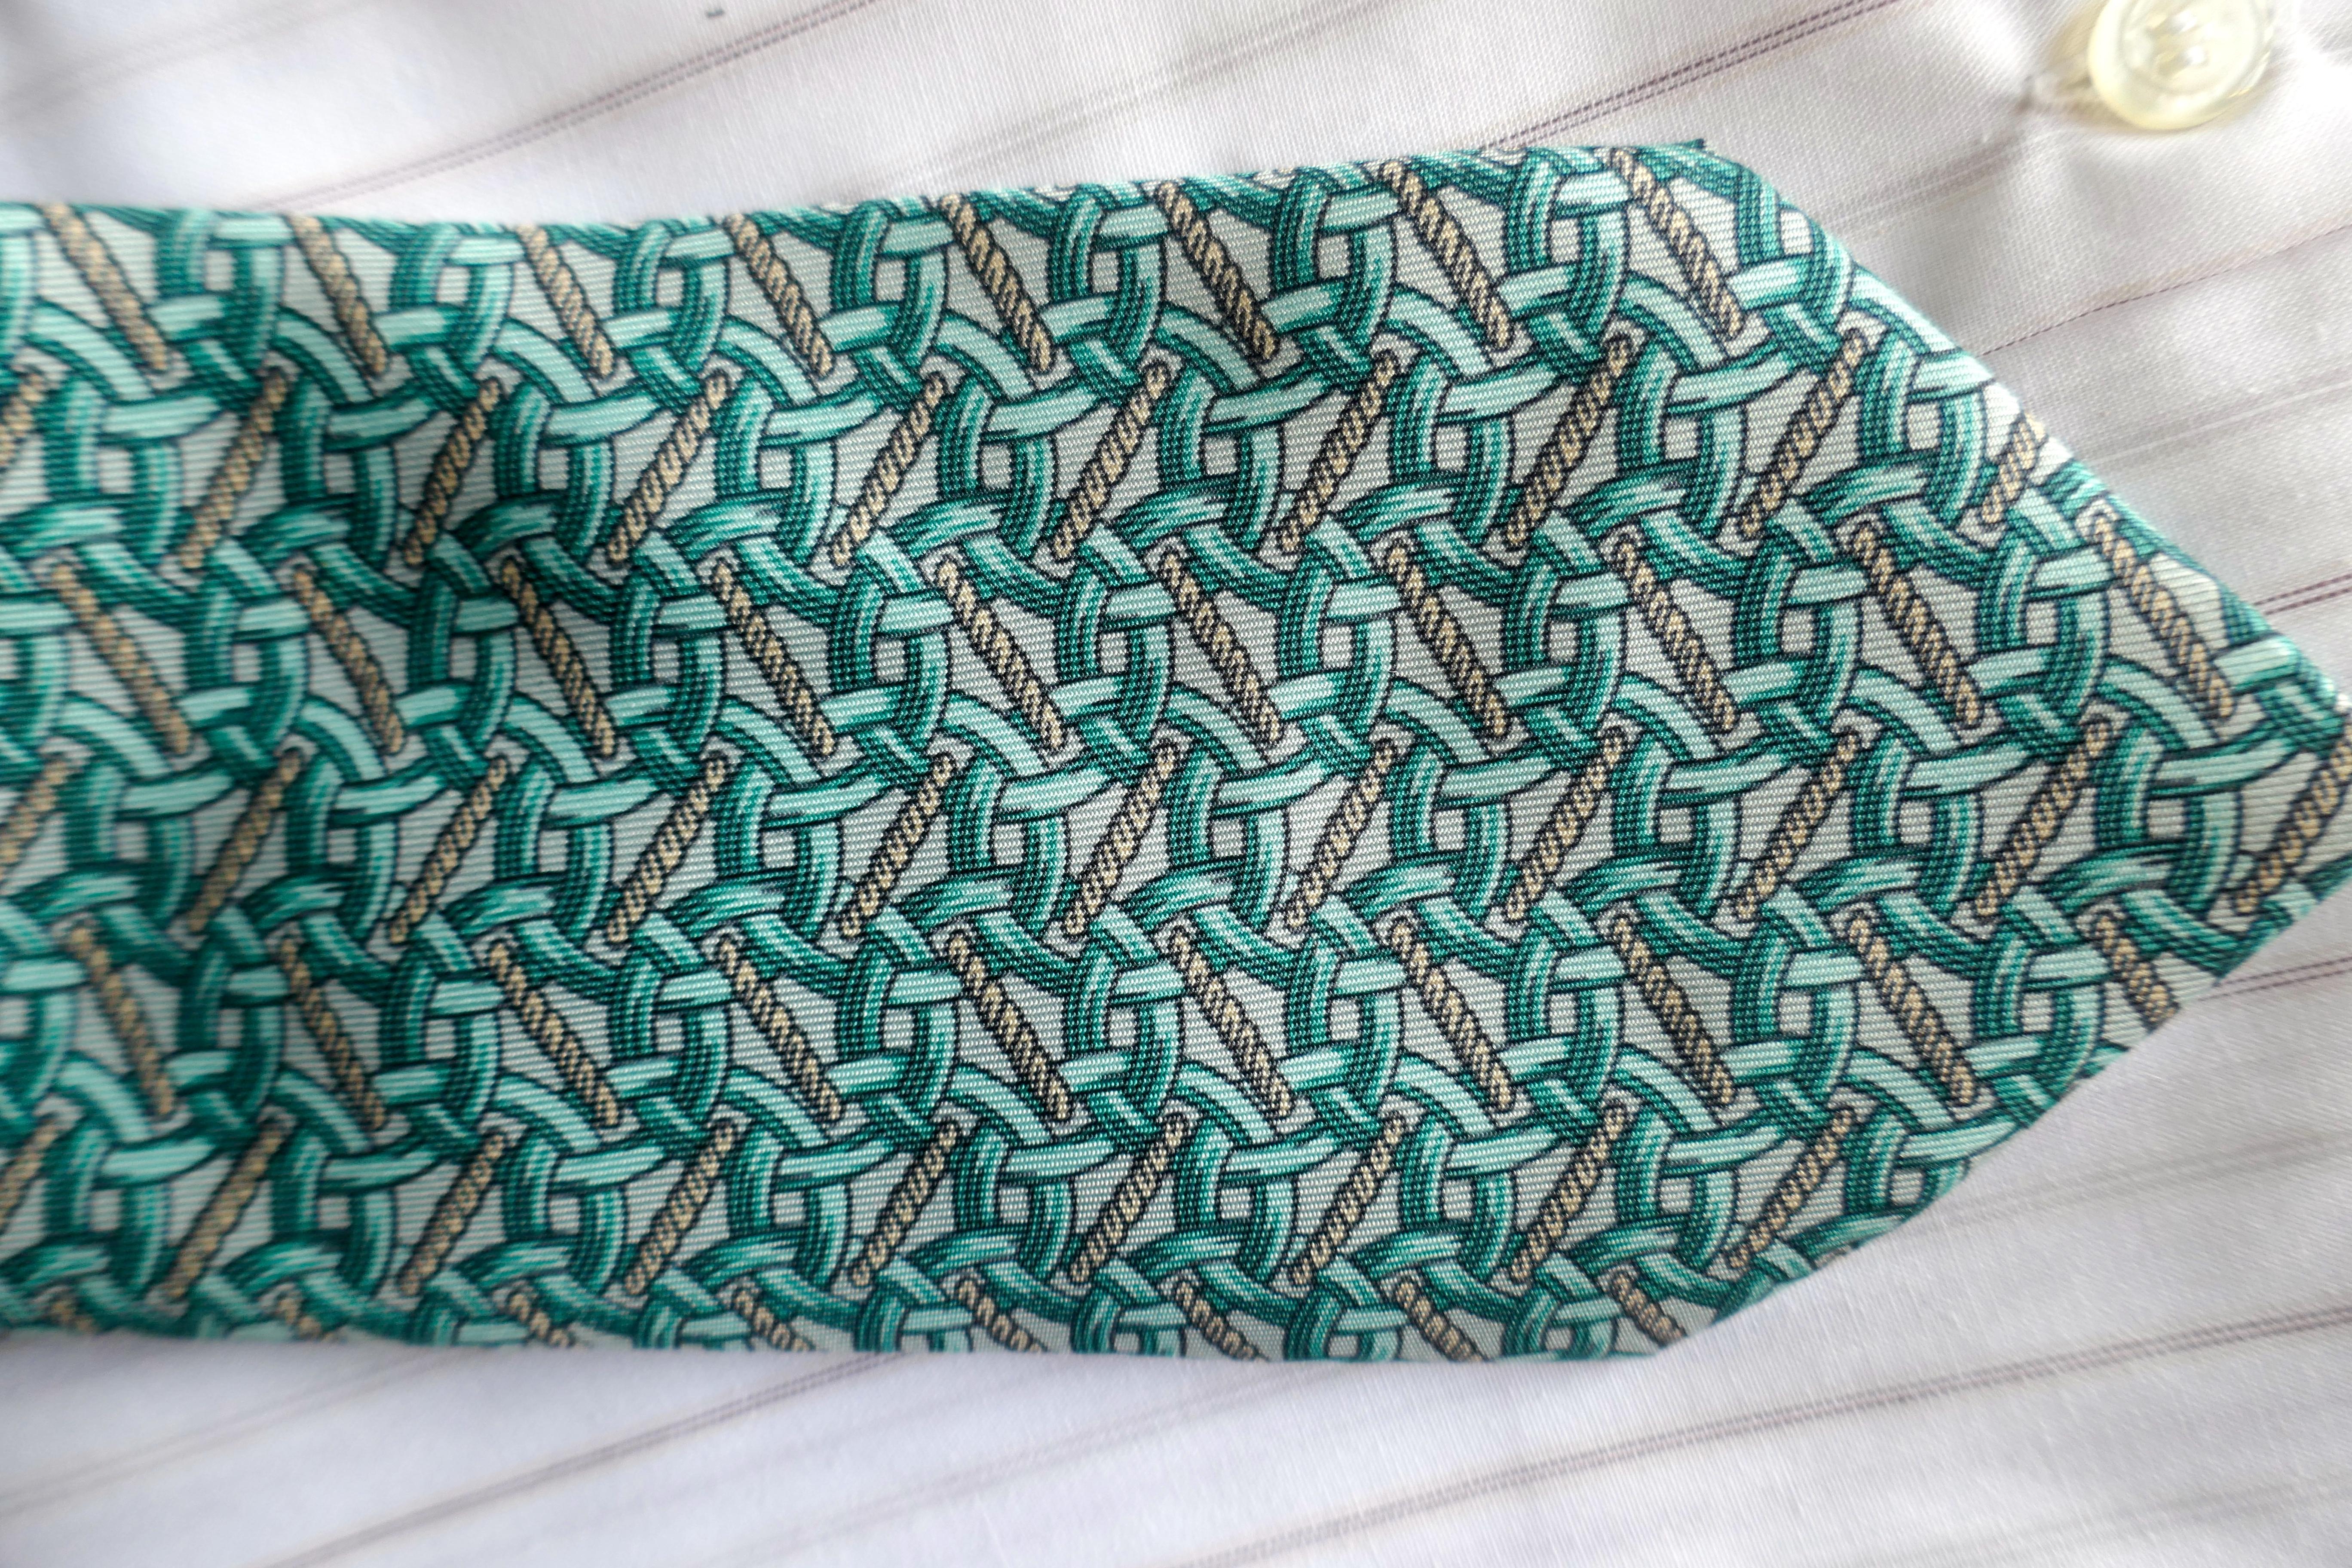 Gray Rare Hermes Silk Tie, All Over Chain Link Pattern, Aqua On Silver/Grey